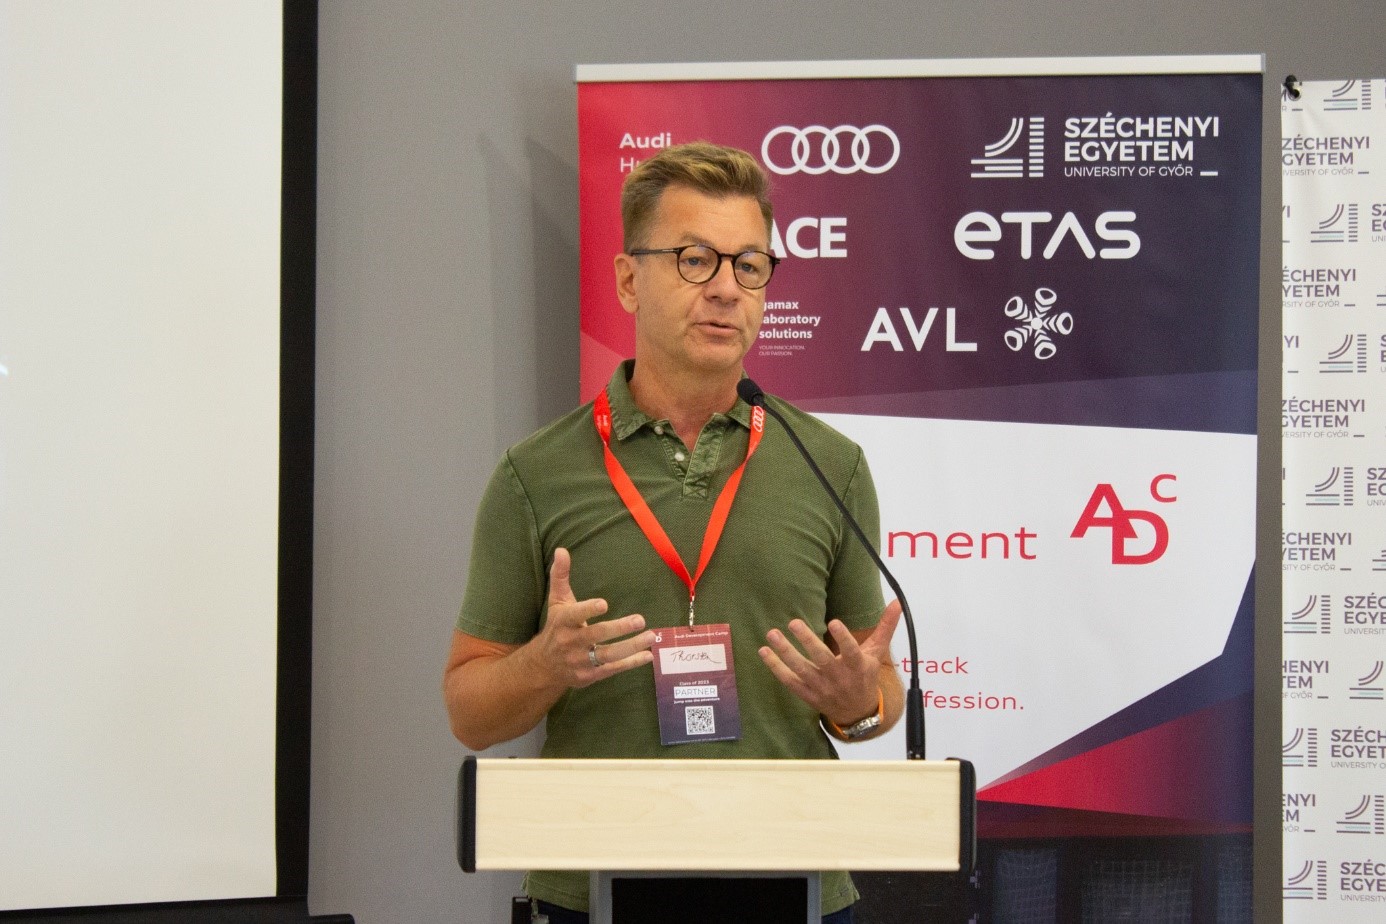 Thorsten Pfeffer emphasized that the camp also presents a tremendous opportunity for Audi Hungaria.